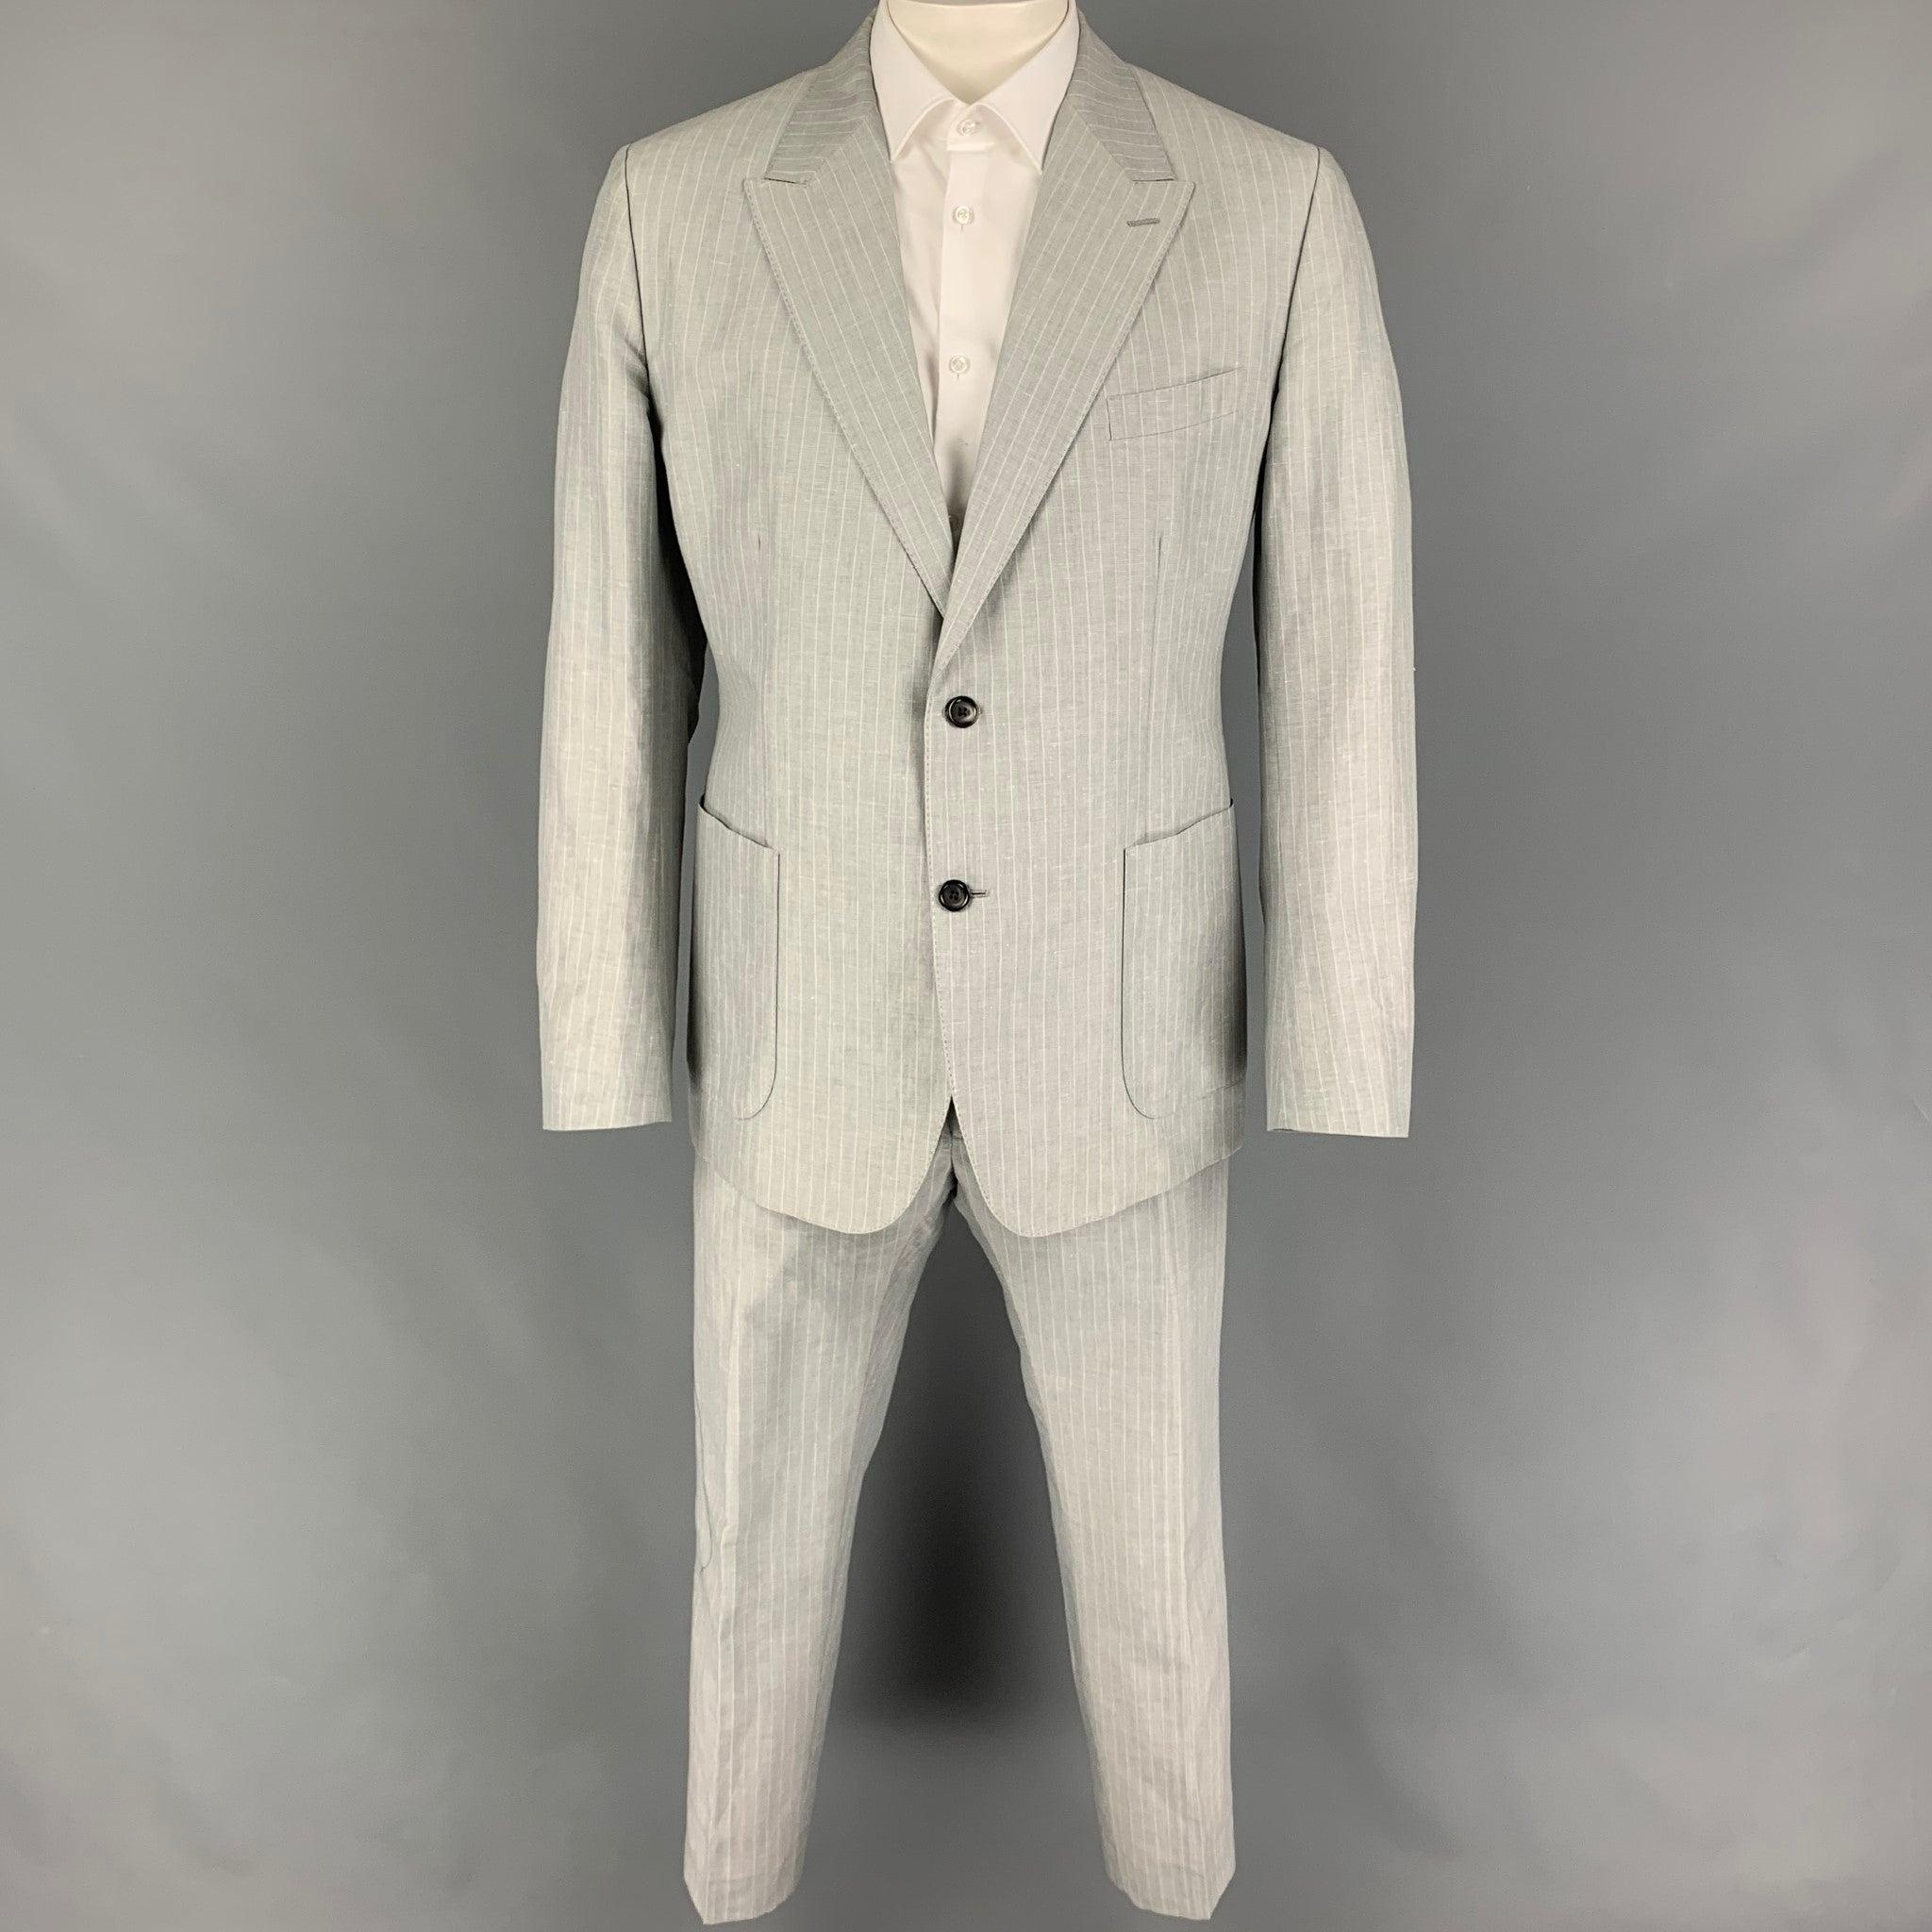 DOLCE & GABBANA
suit comes in a light gray stripe linen / cotton with a half liner and includes a single breasted, double button sport coat with a peak lapel and matching flat front trousers. Made in Italy. Very Good Pre-Owned Condition. 

Marked:  